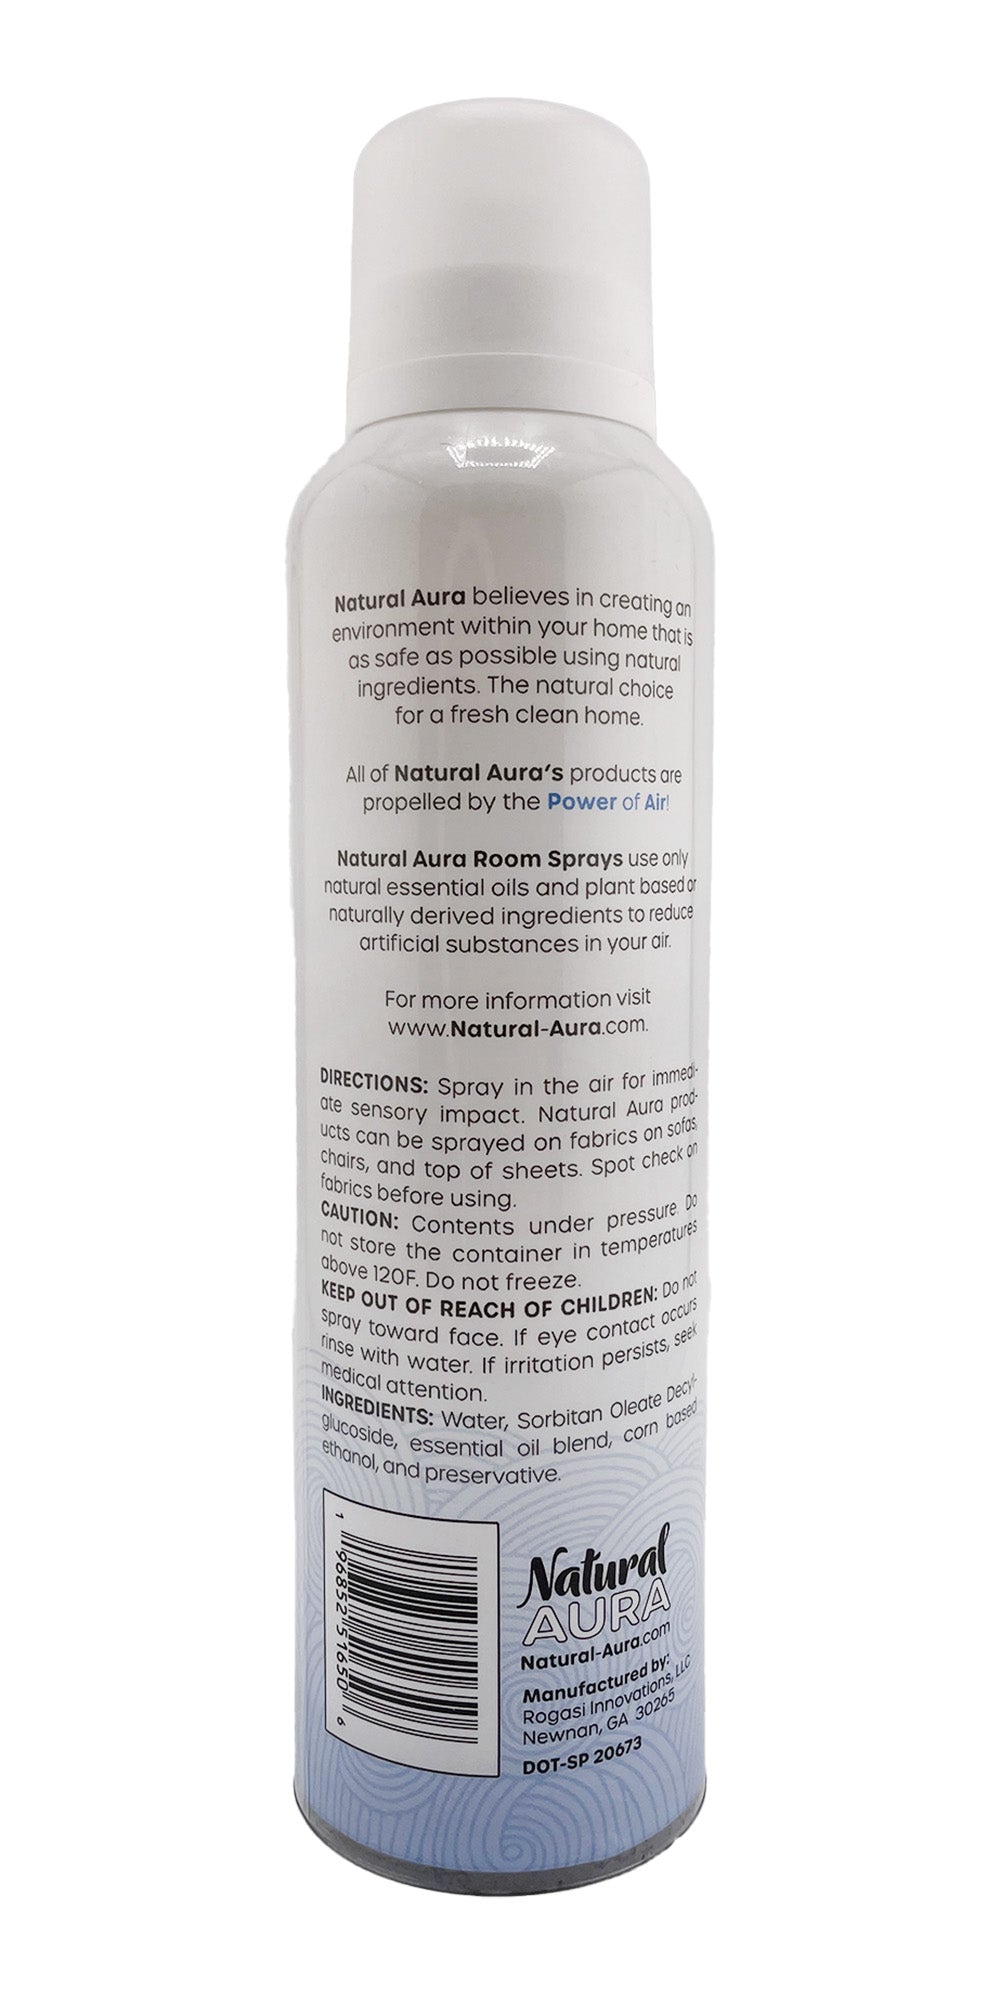 Back label of a bottle of Natural Aura Apple and Quince Room Spray on a white background.